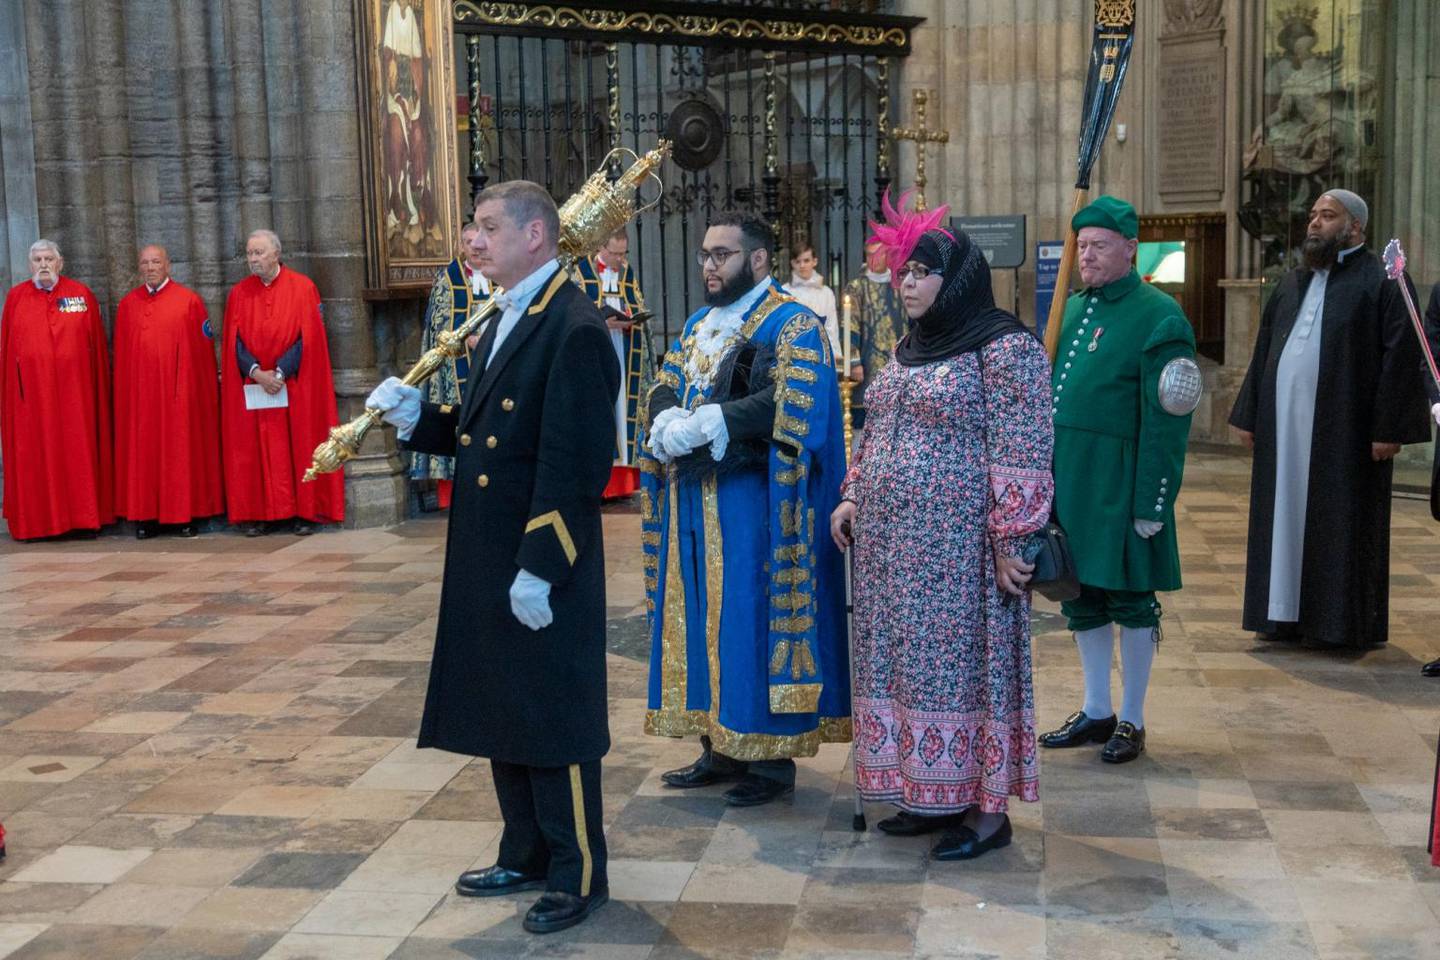 The lord mayor's mother, Soud, acting as consort for the day at Westminster Abbey cathedral. Photo: Picture Partnership/Westminster Abbey